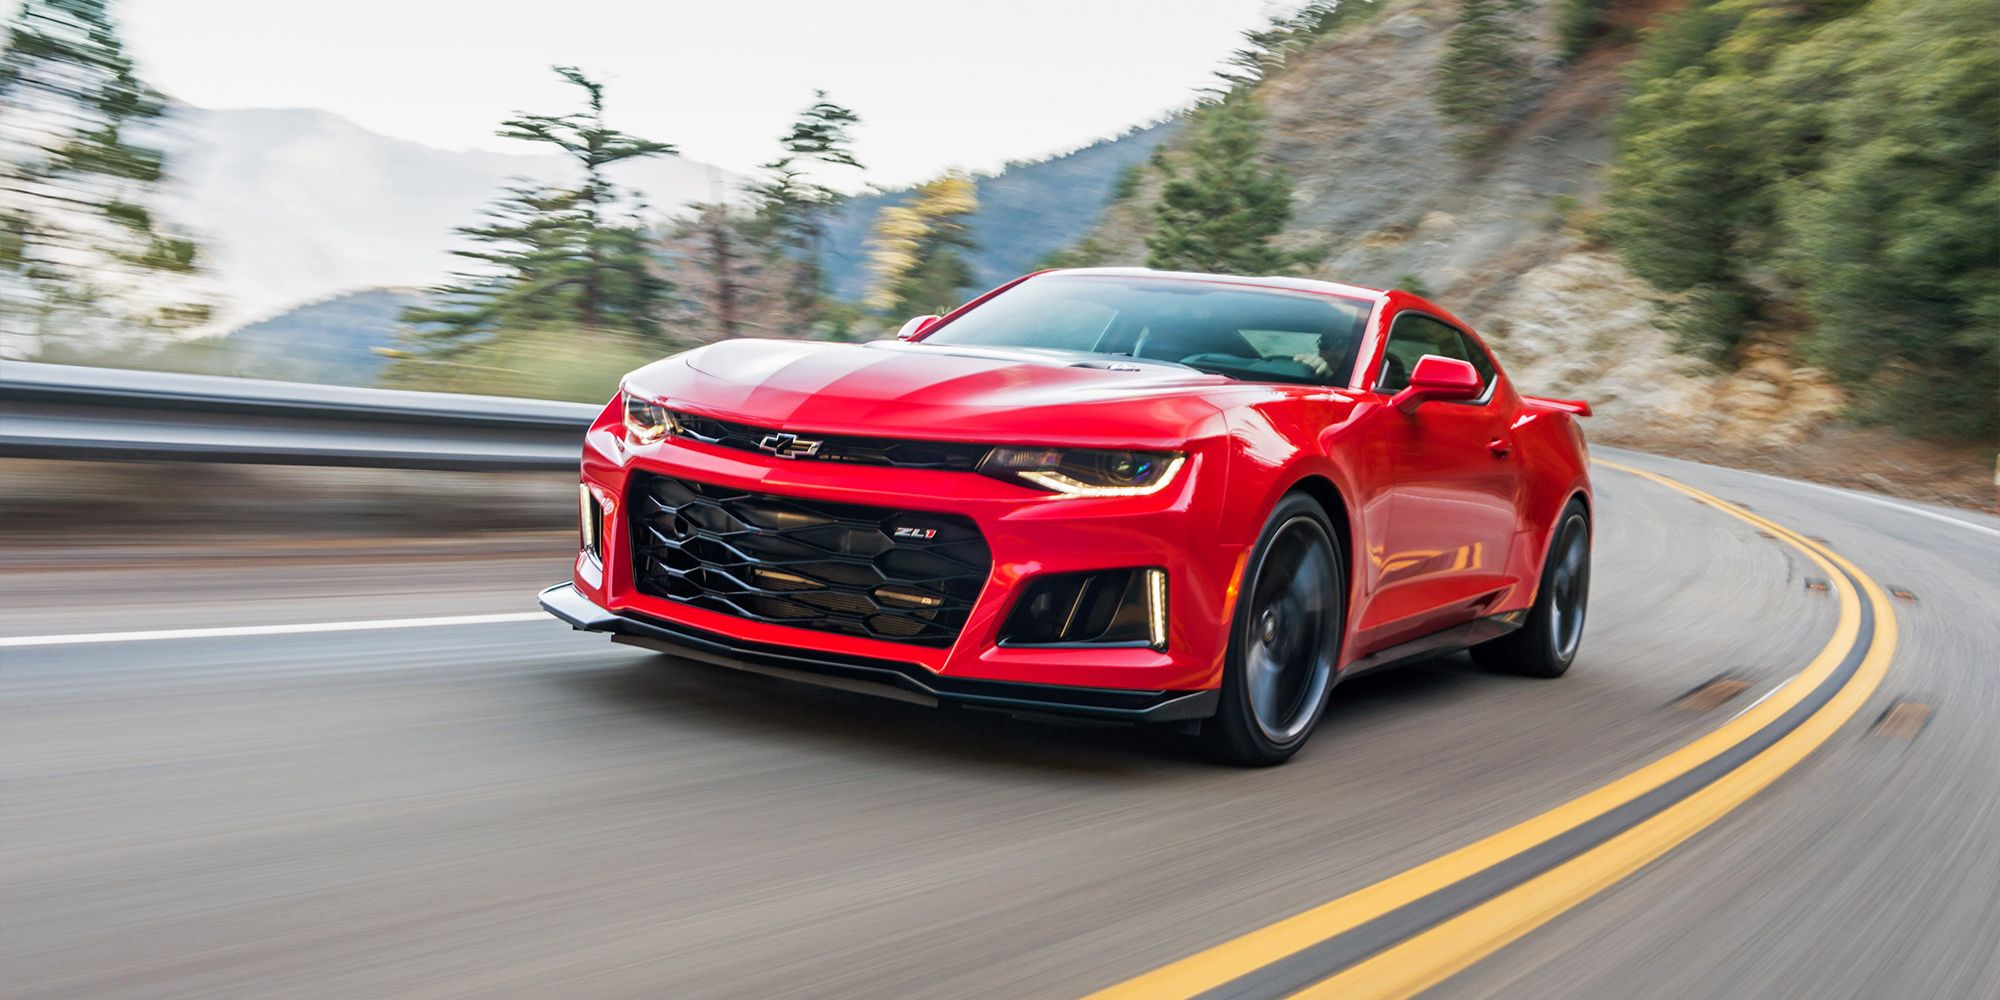 The front of the new Camaro ZL1